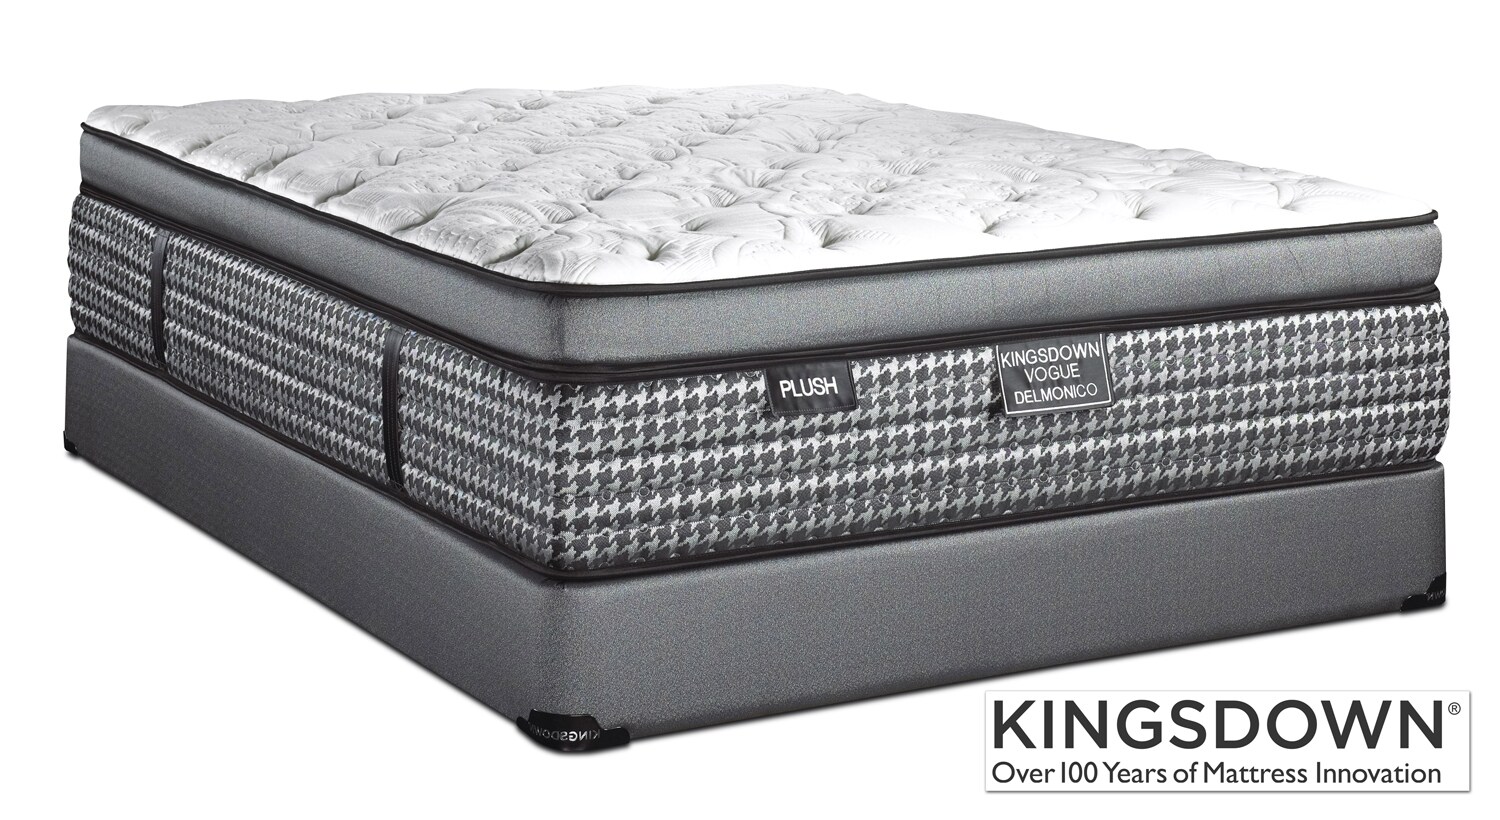 What are some common complaints about Kingsdown mattresses?